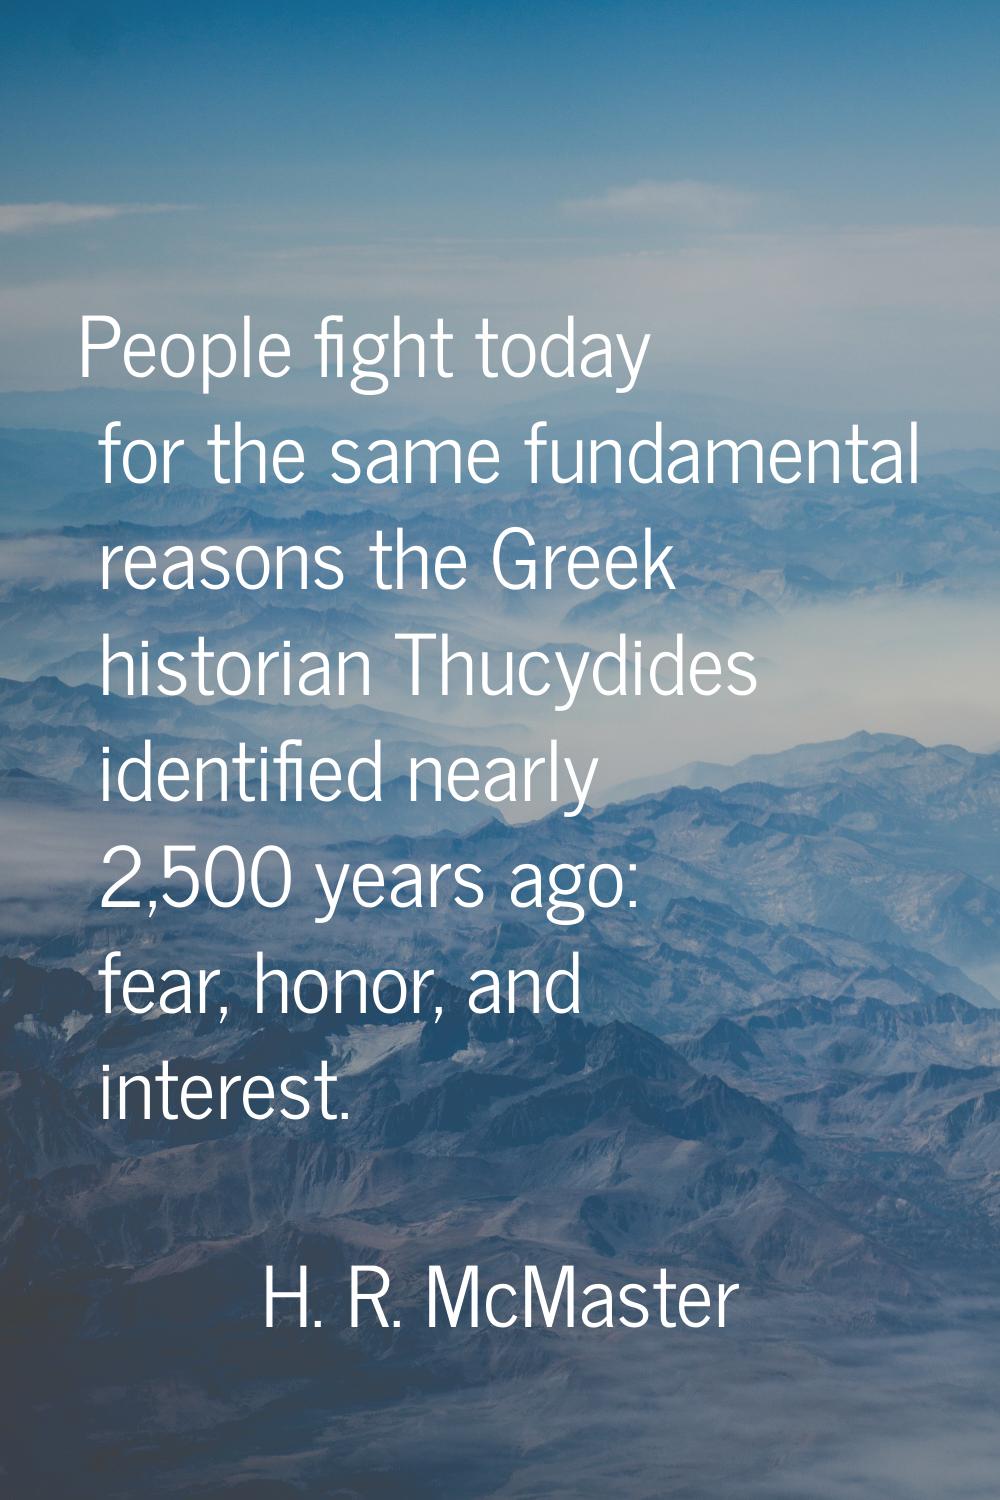 People fight today for the same fundamental reasons the Greek historian Thucydides identified nearl